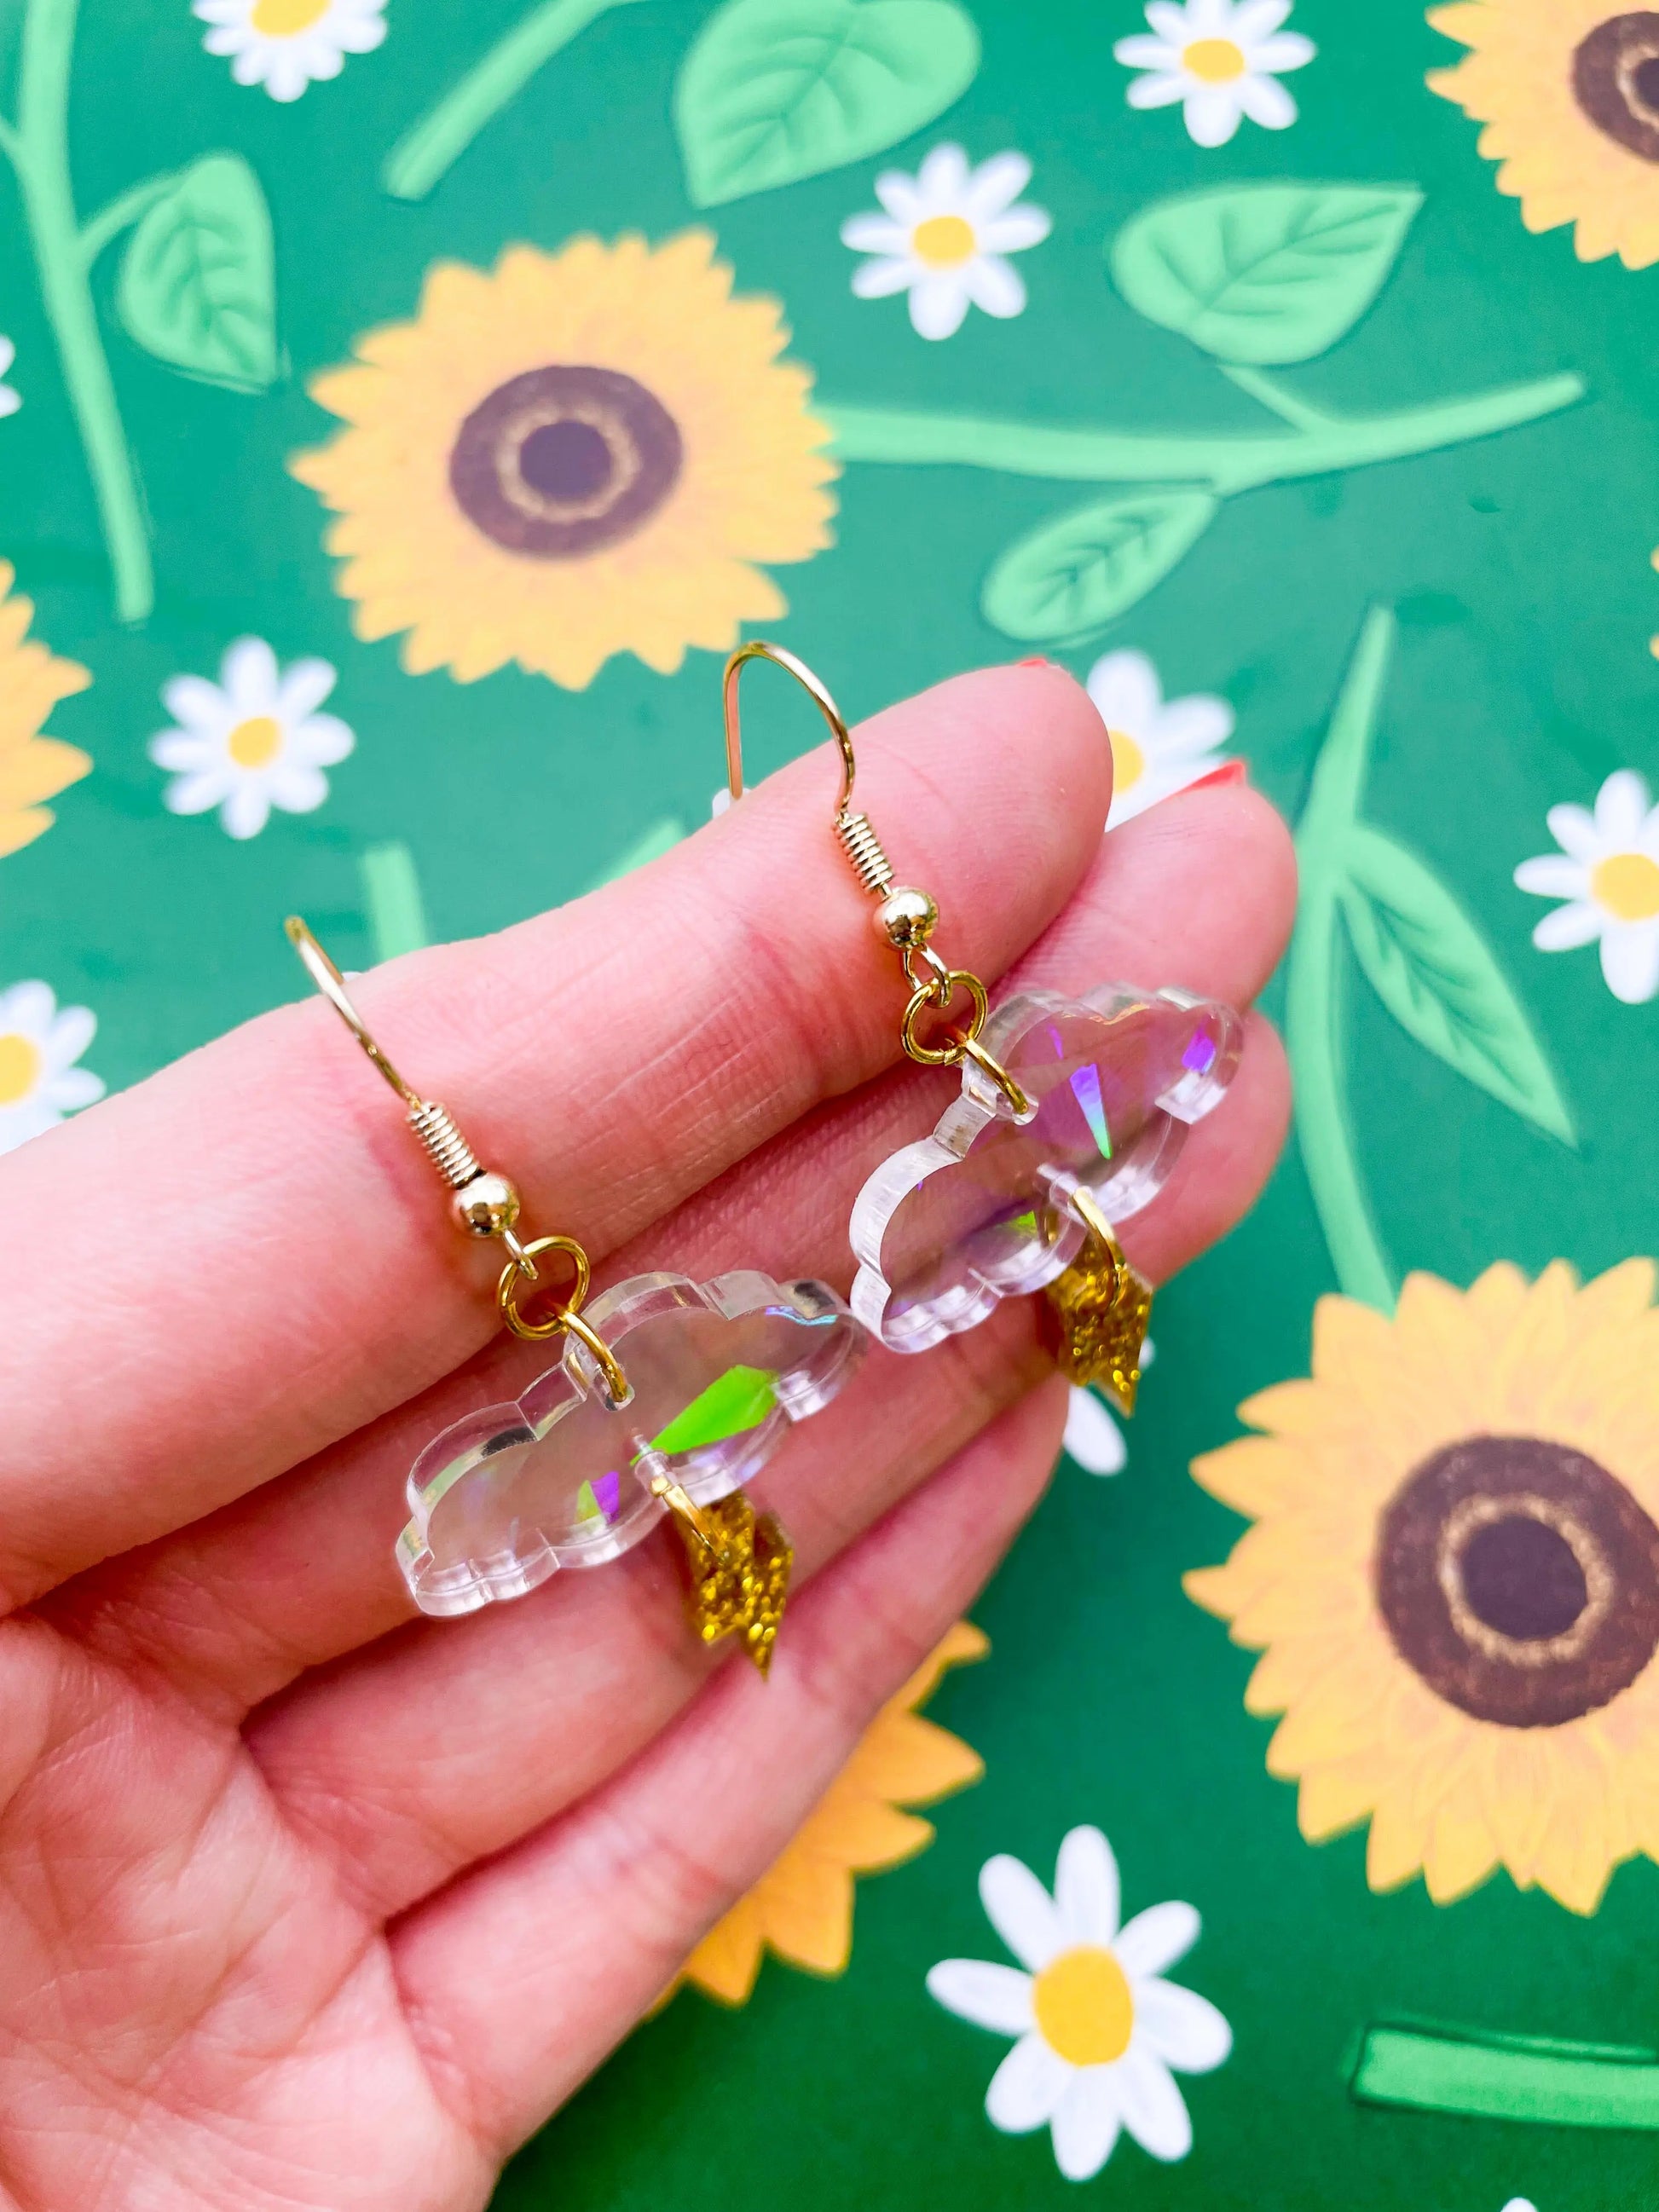 Iridescent Rainbow and Gold Glitter April Storms Small Cloud & Bolt Dangle Earrings from Sapphire Frills